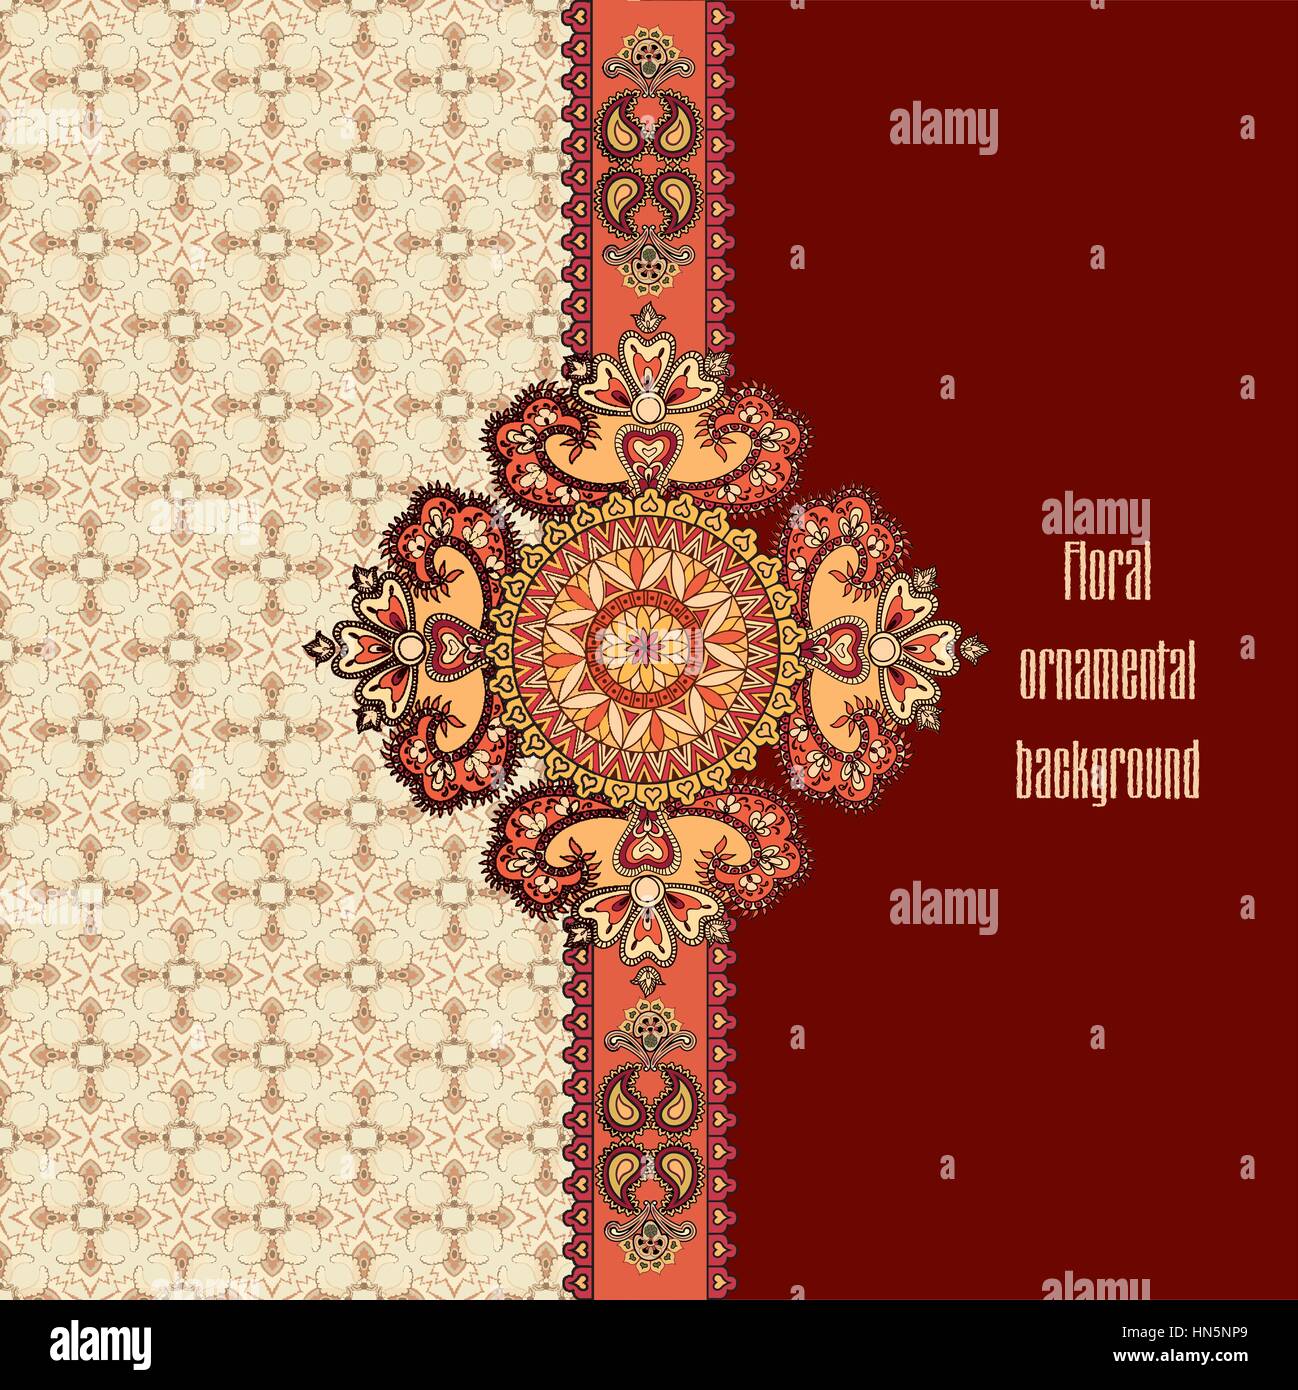 Flourish tiled pattern. Abstract floral geometric seamless oriental background. Fantastic flowers and leaves. Wonderland motives of the paintings of a Stock Vector